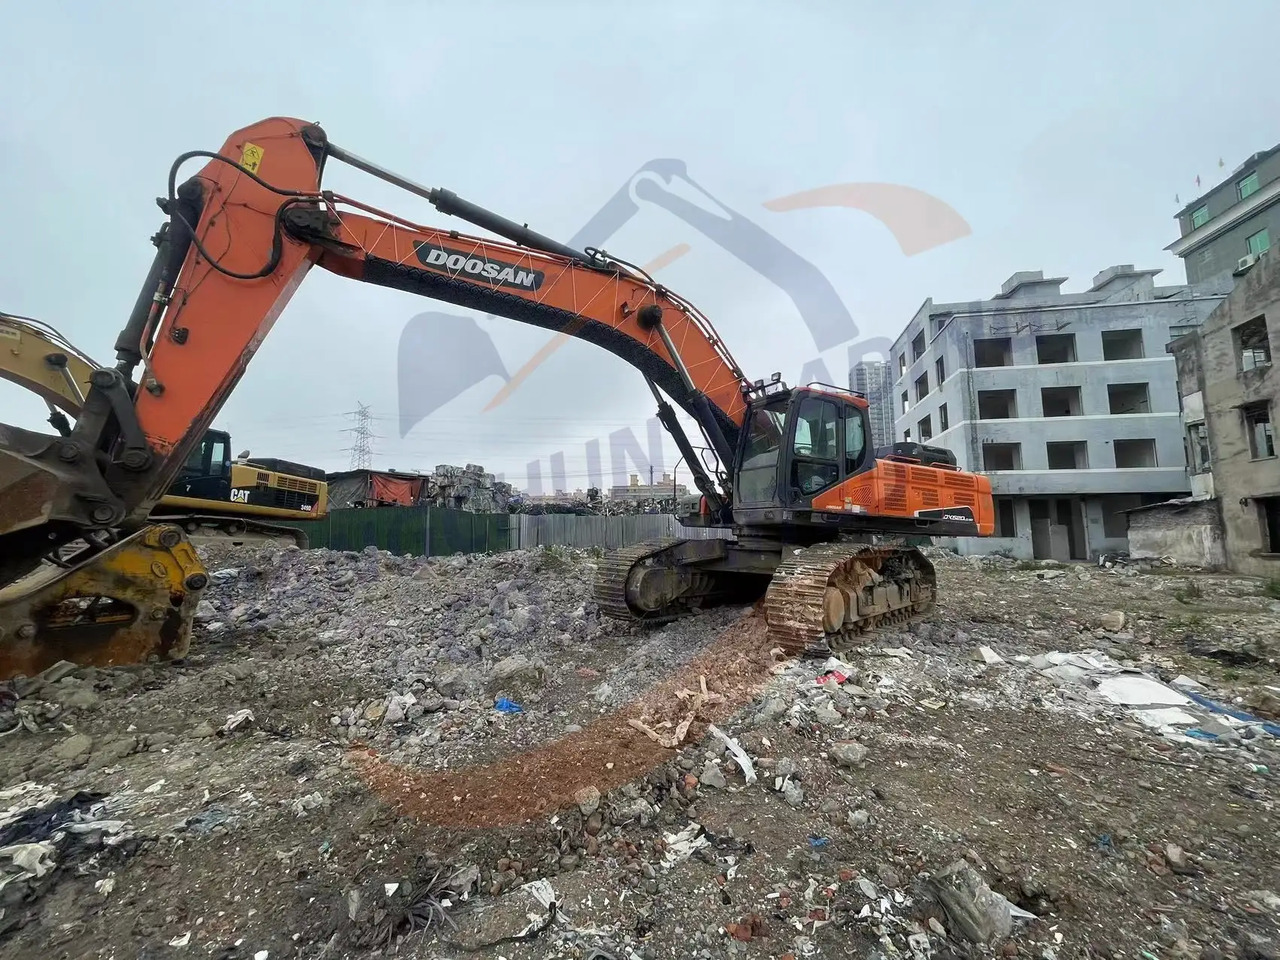 Máy xúc bánh xích new arrival Used Doosan excavator DX520LC-9C in good condition for sale in good condition: hình 4